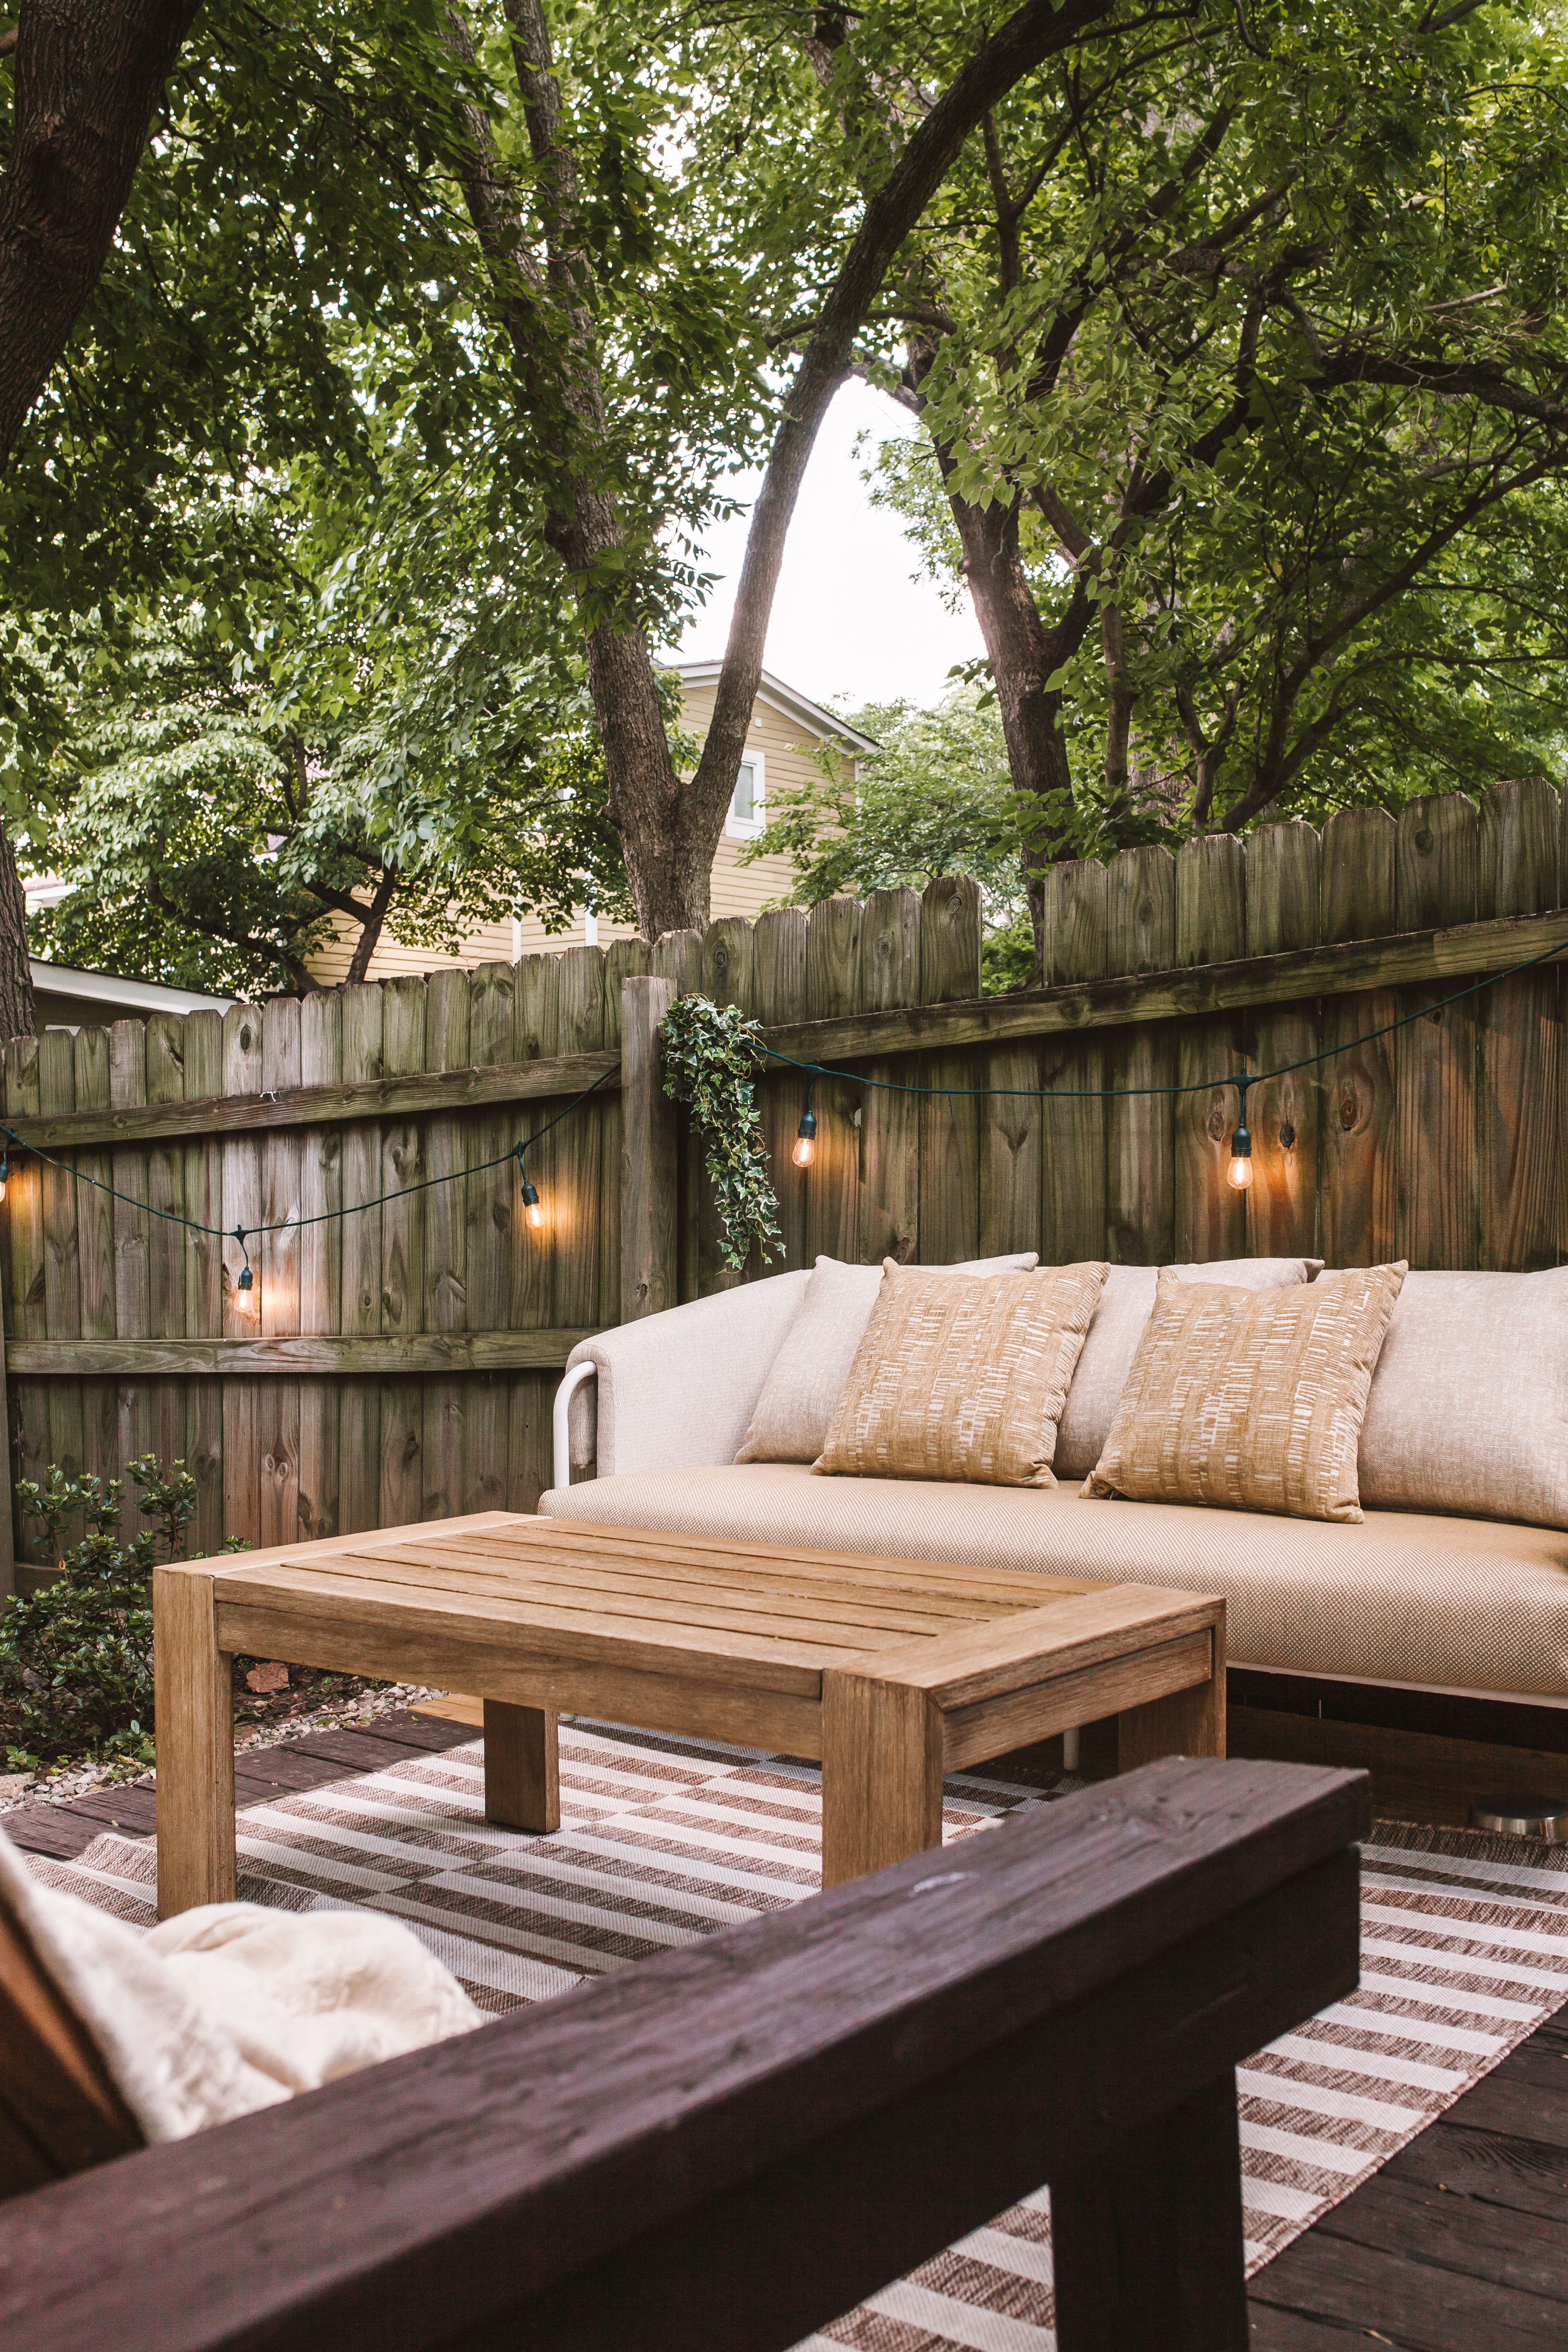 How we created an outdoor oasis in our very tiny Atlanta backyard | bygabriella.co